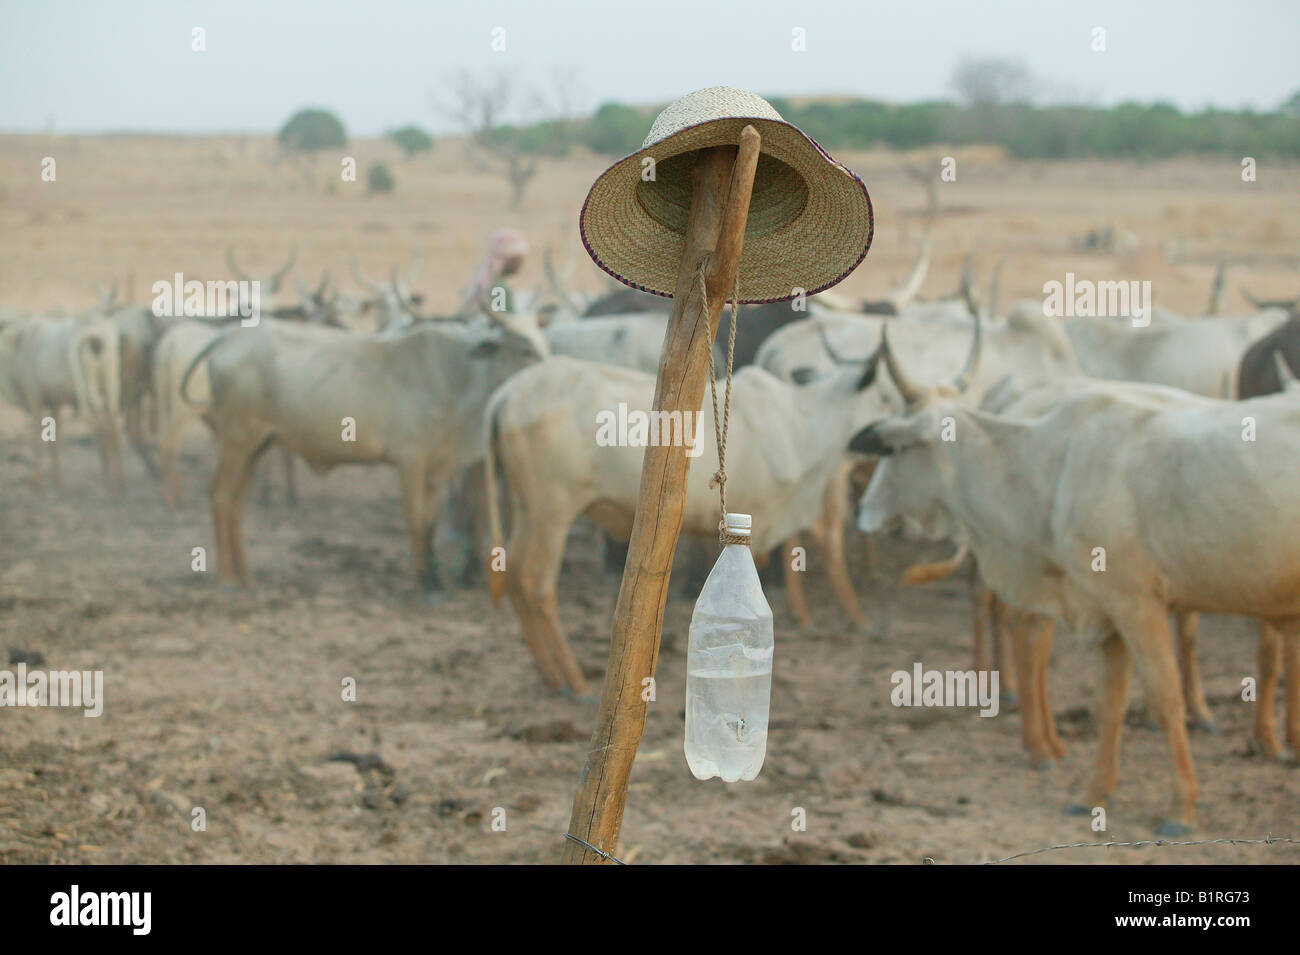 https://c8.alamy.com/comp/B1RG73/shepherds-water-bottle-and-straw-hat-in-front-of-a-herd-of-zebus-bos-B1RG73.jpg